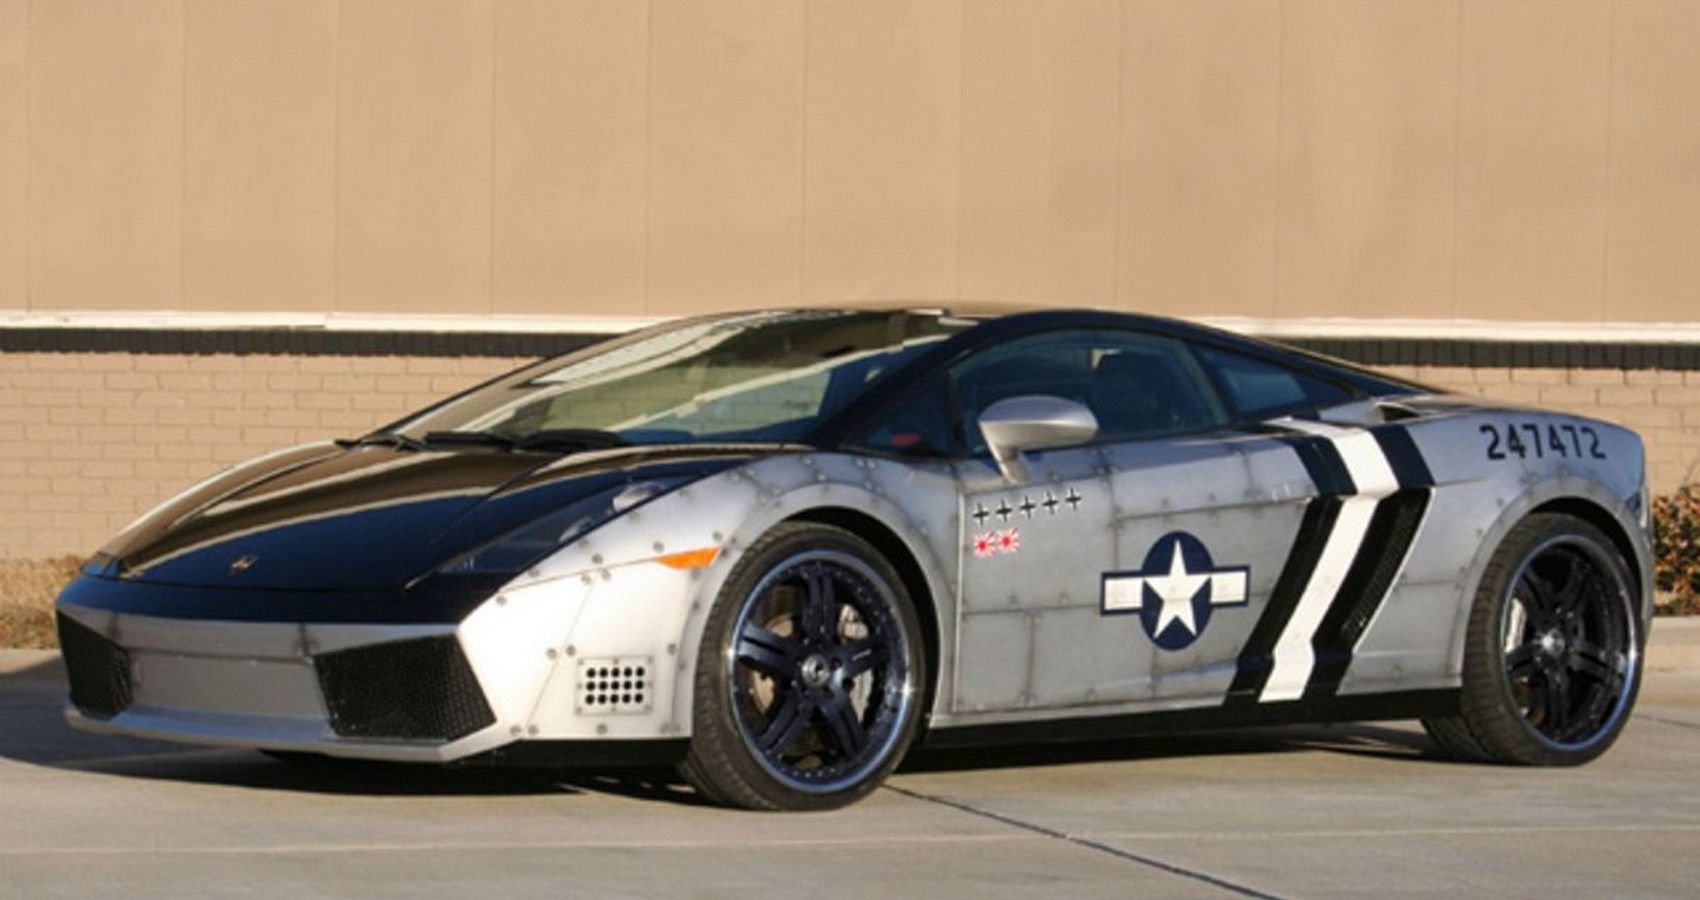 5 Worst Cars Built By West Coast Customs (5 We'd Actually Love To Own)